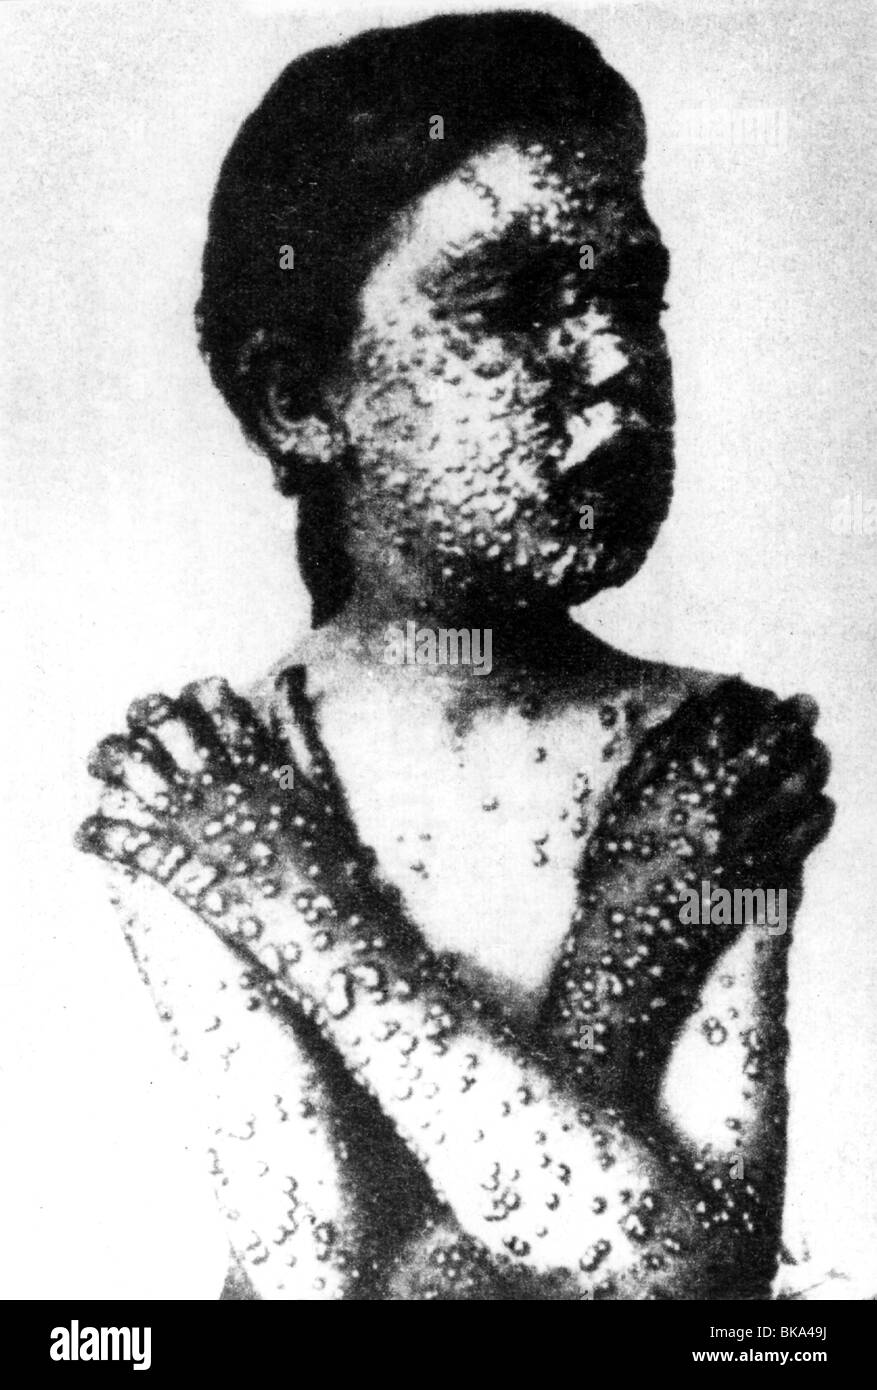 medicine, pandemic disease, smallpox, child seized with pox on the hole body, 19th century, historic, historical, variola, disease, illness, diseases, illnesses, deformation, deformations, warp, skin, rash, erupt, pustule, pustules, epidemic, epidemics, symptoms, sign, indication, signs, indications, sick person, sick people, the sick, chronically sick person, the chronically sick people, incurable, Stock Photo